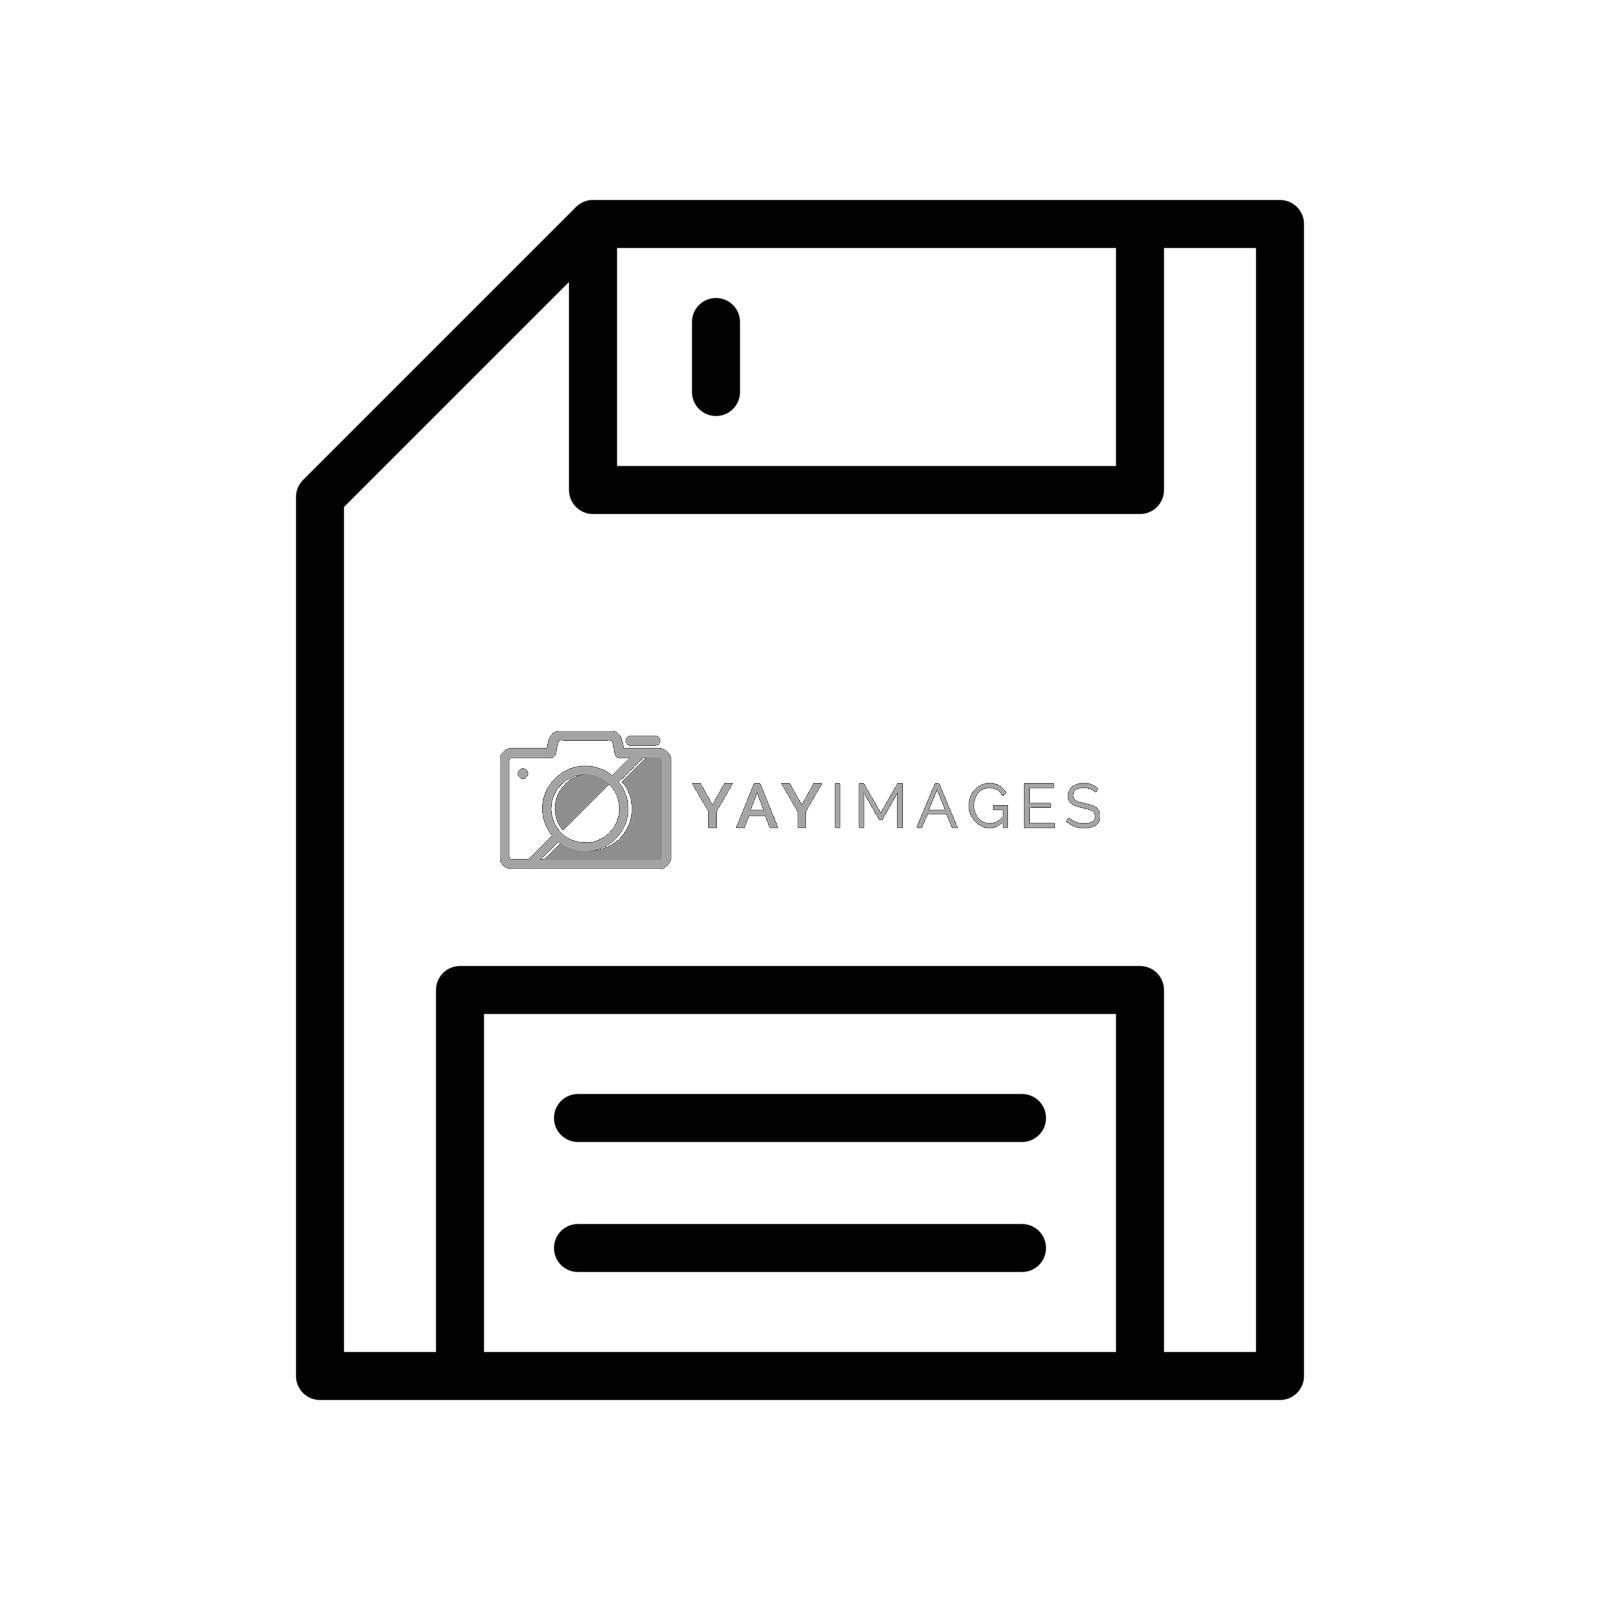 Royalty free image of diskette by vectorstall